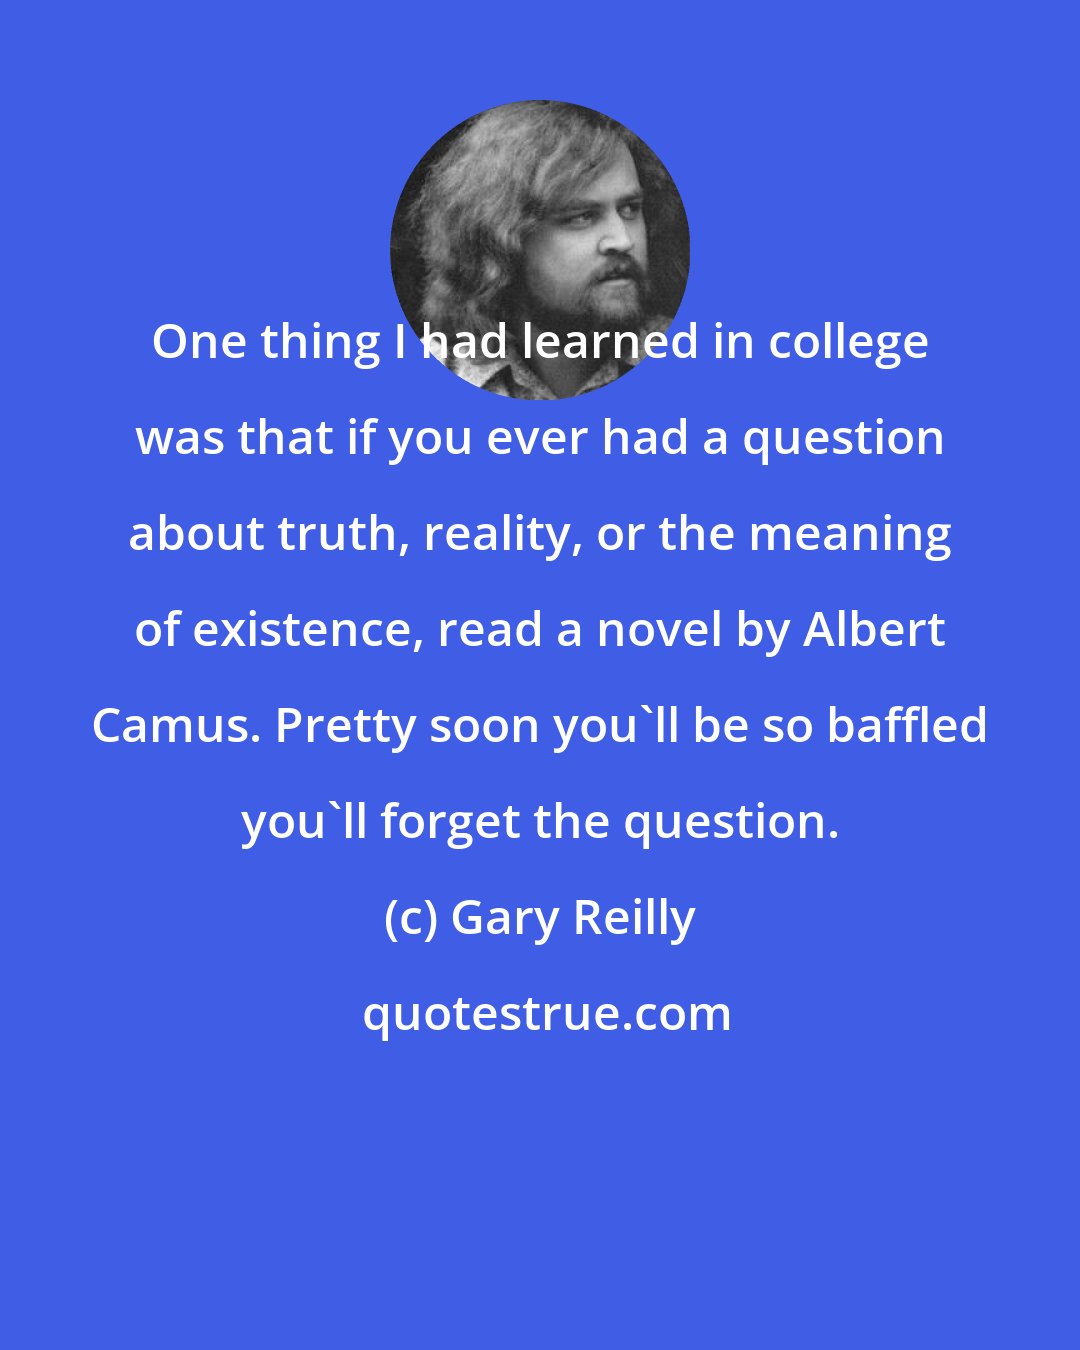 Gary Reilly: One thing I had learned in college was that if you ever had a question about truth, reality, or the meaning of existence, read a novel by Albert Camus. Pretty soon you'll be so baffled you'll forget the question.